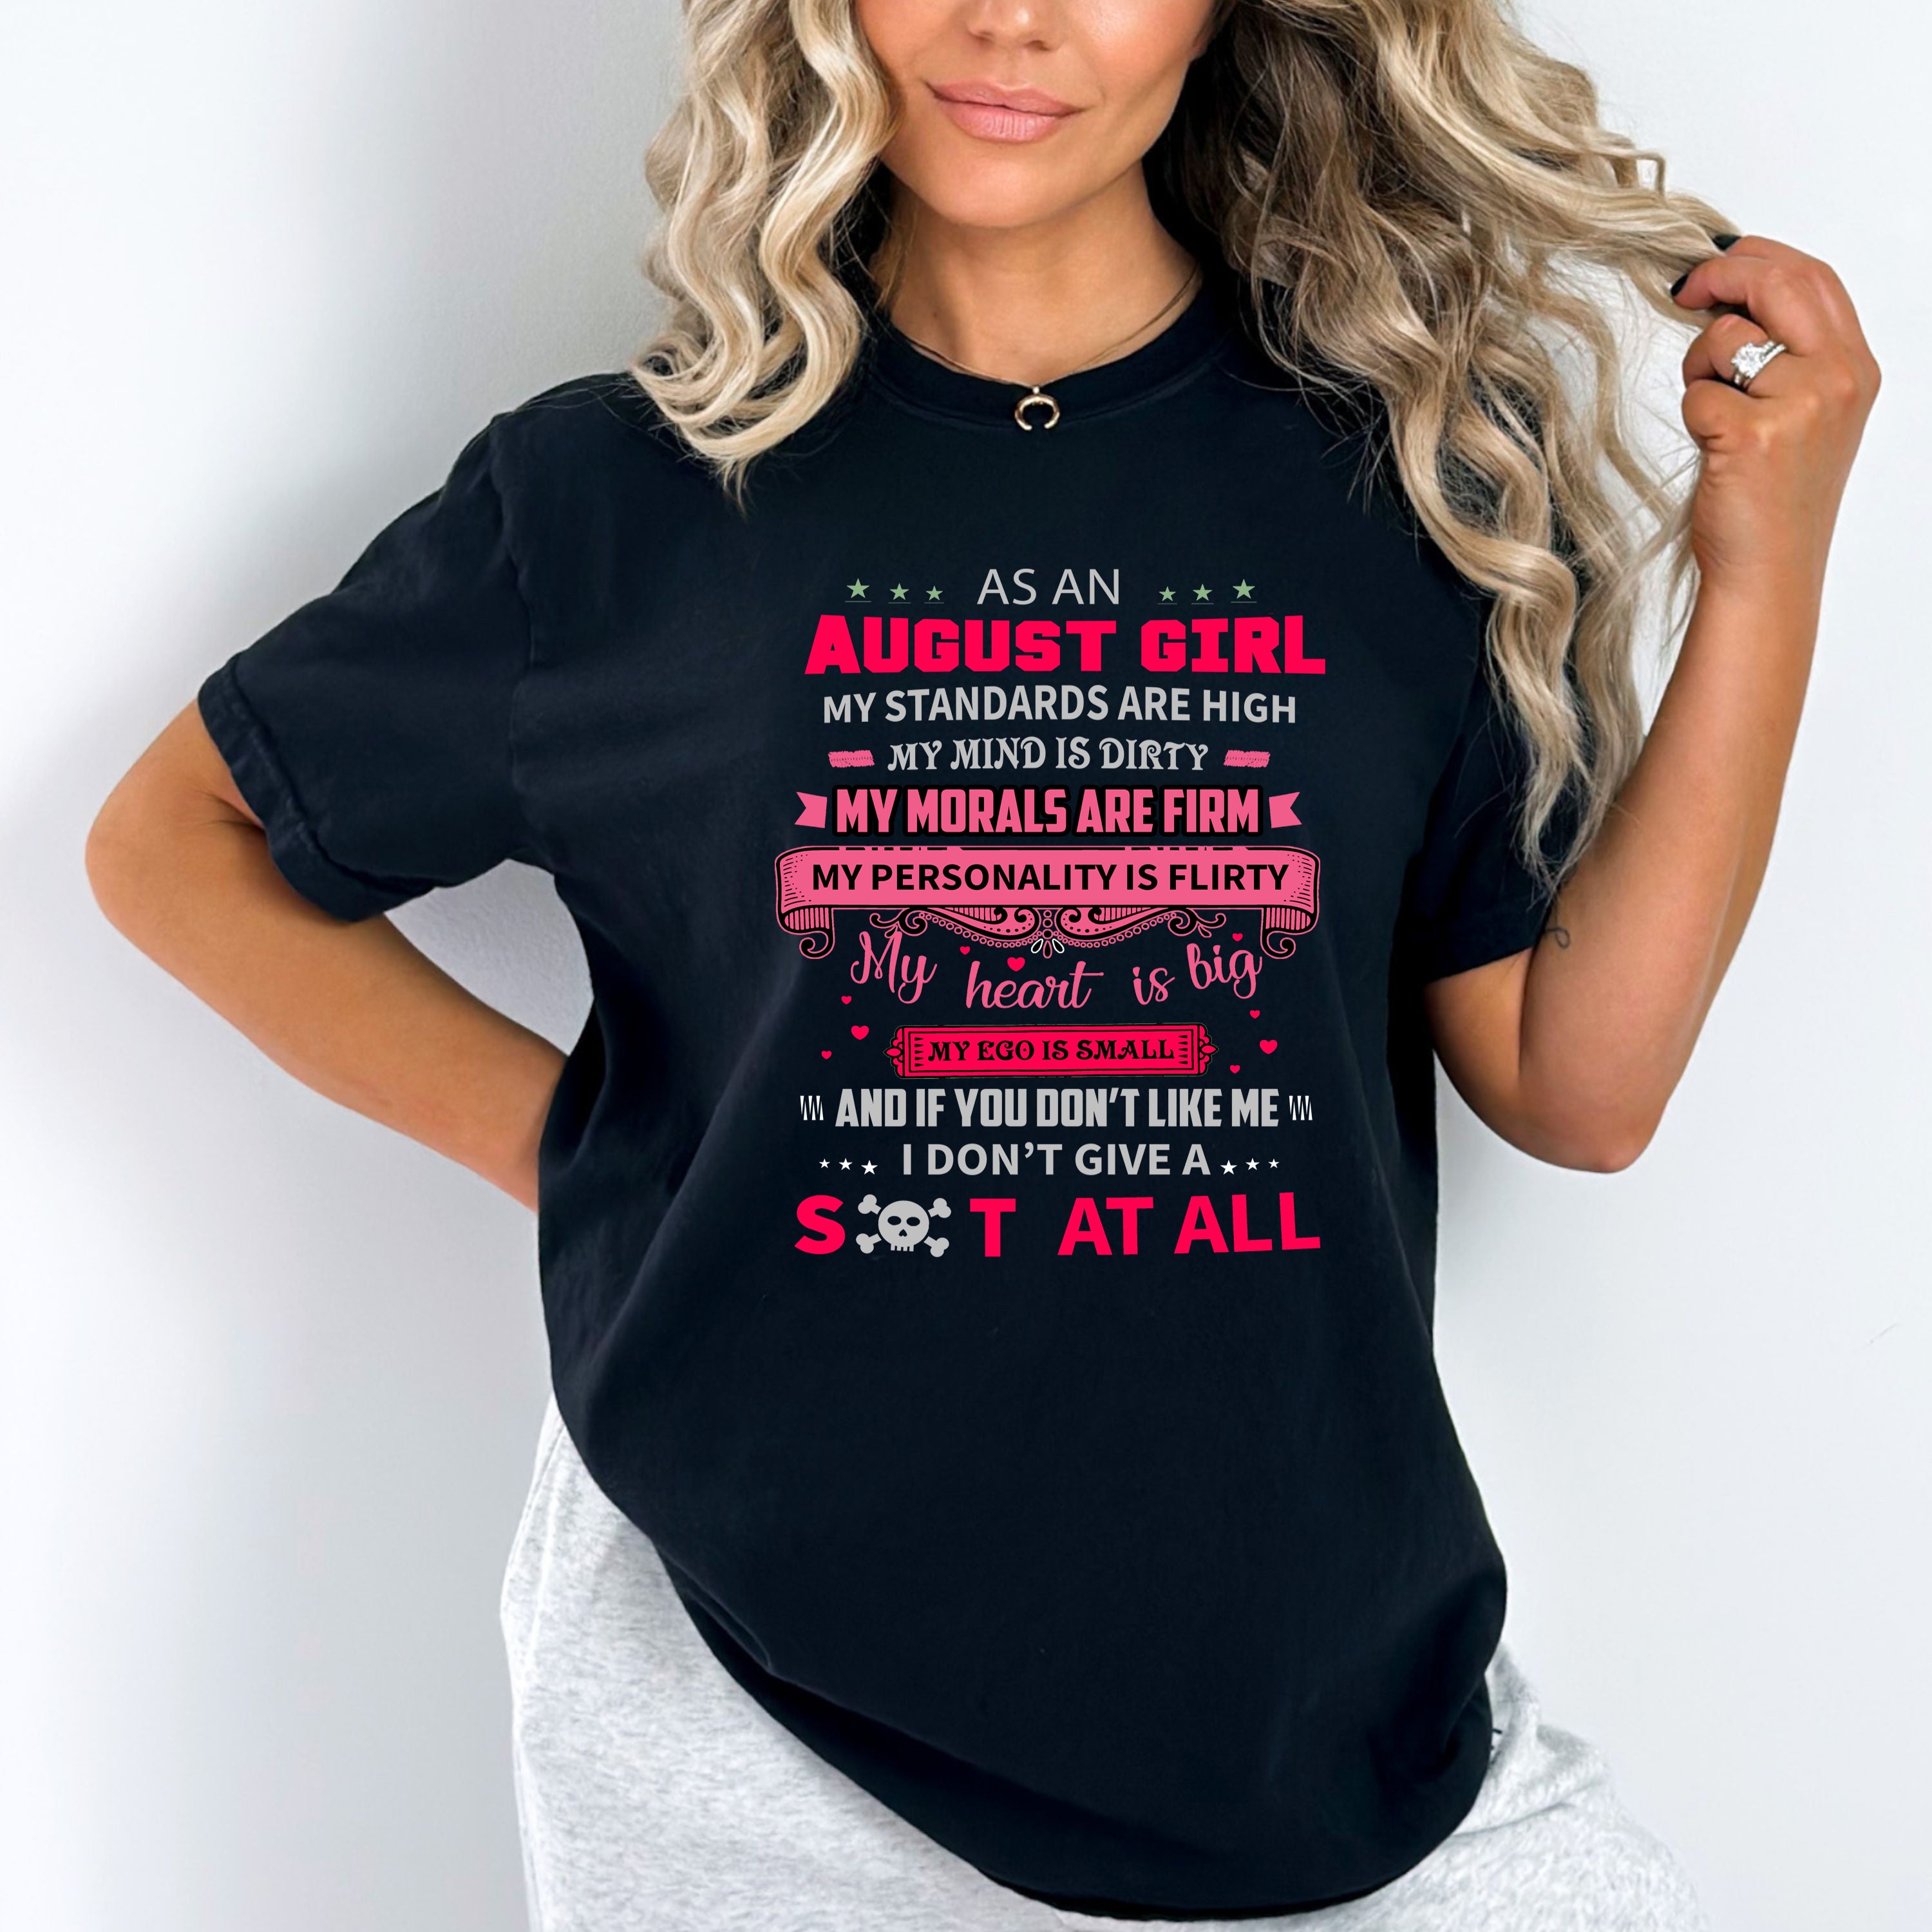 "As An August Girl My Standards Are High"